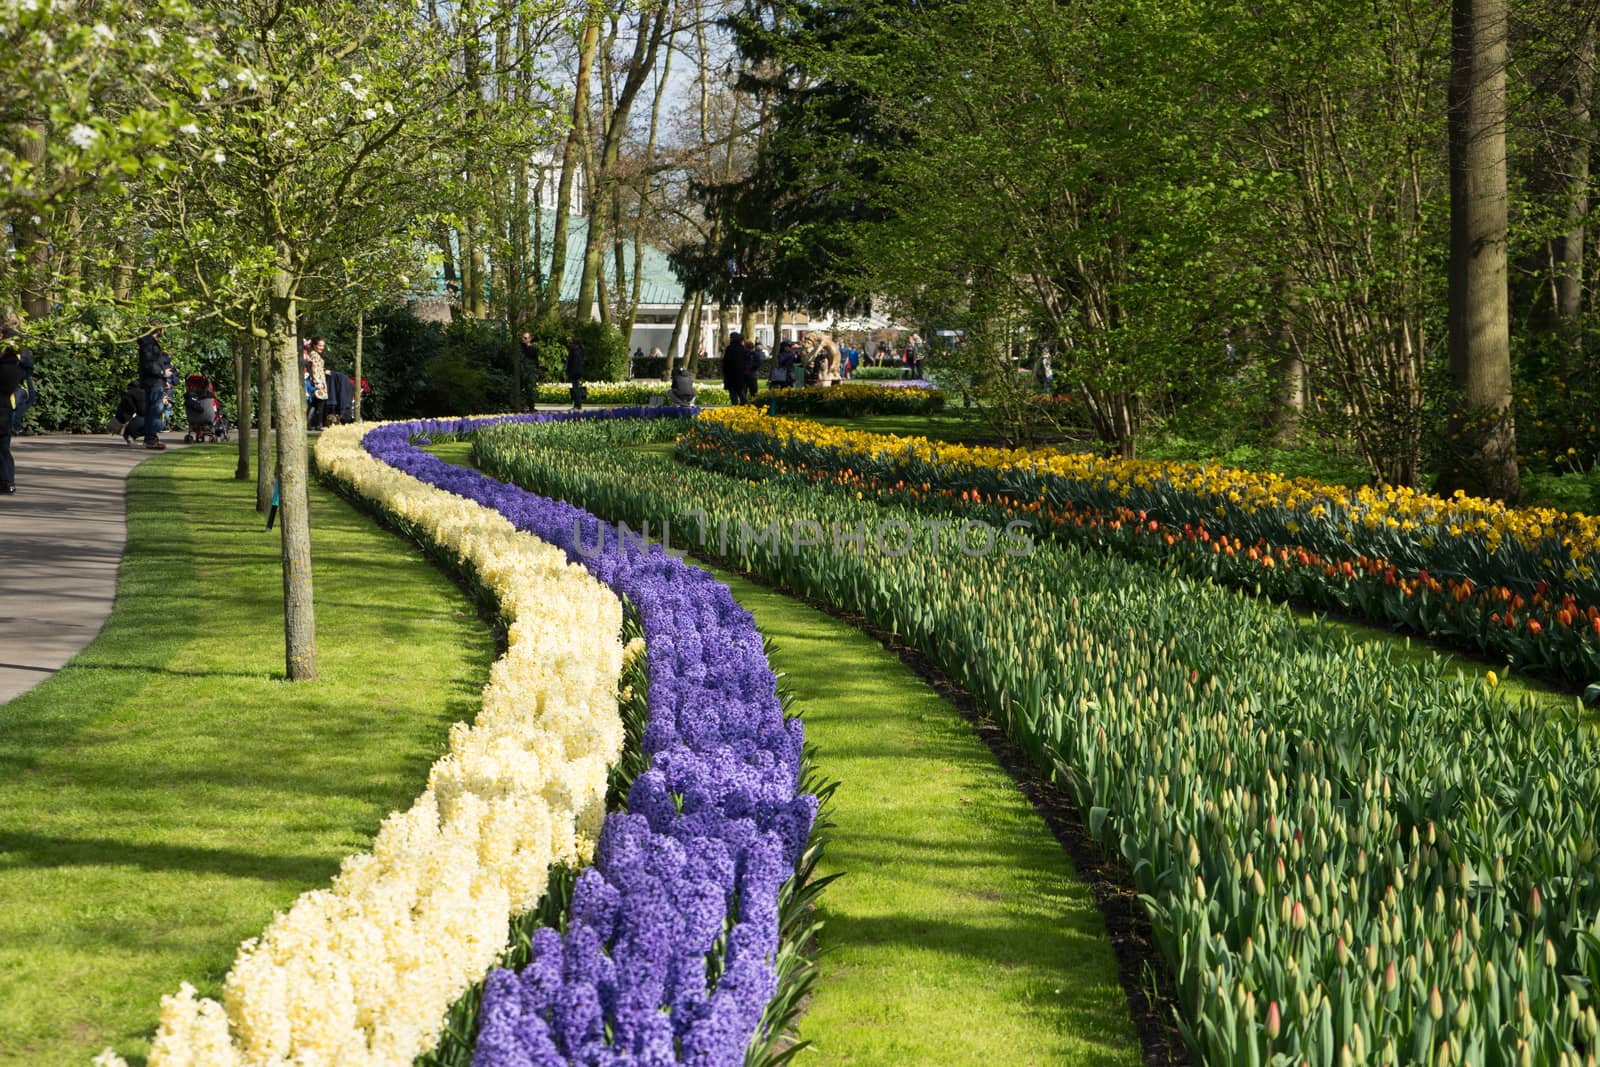 Row of tulips and hyacinth at a garden in Lisse, Netherlands, Eu by ramana16